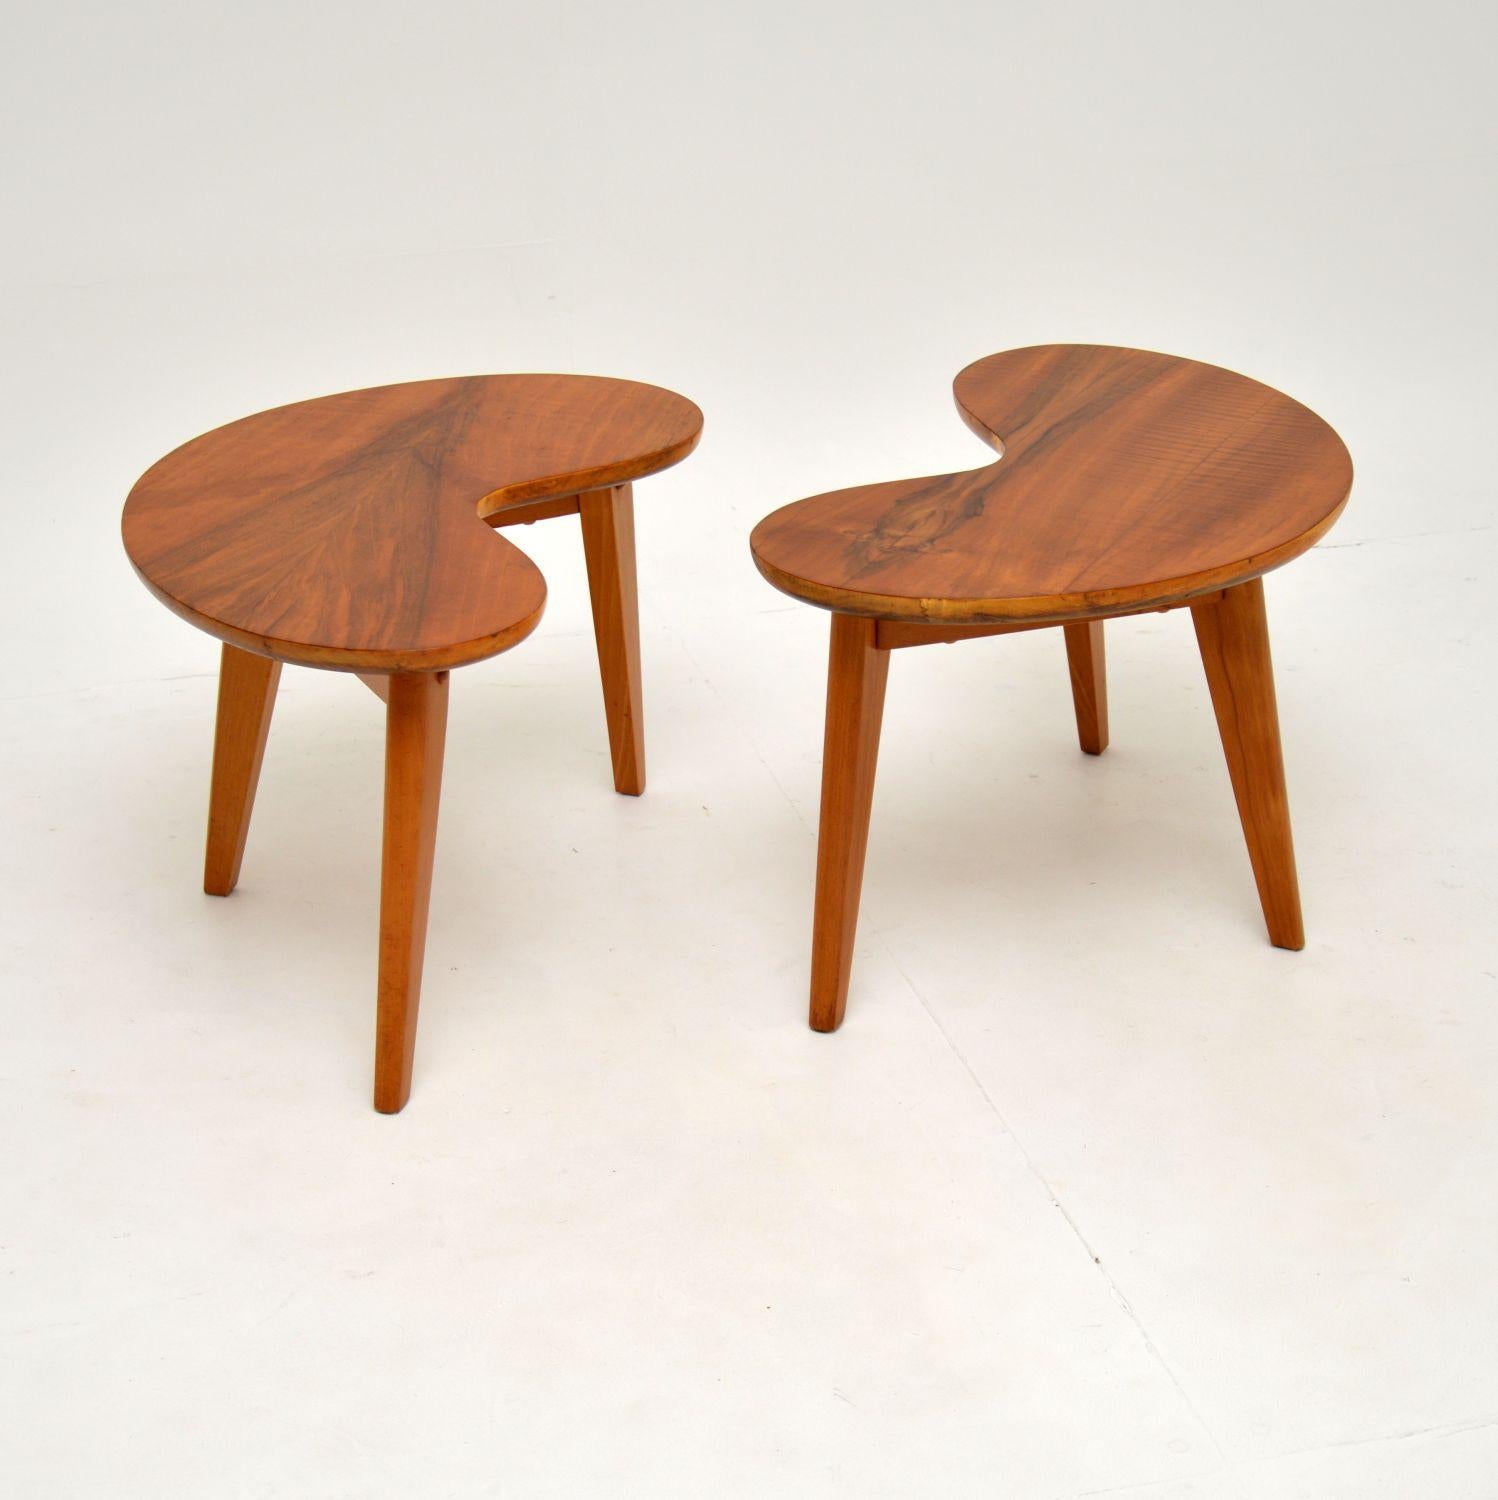 A stunning pair of vintage walnut kidney shaped side tables. These were made in England, they date from the 1950-1960’s.

The quality is fantastic, they are sturdy and are a very useful size. The shape is perfect for use as end tables either side